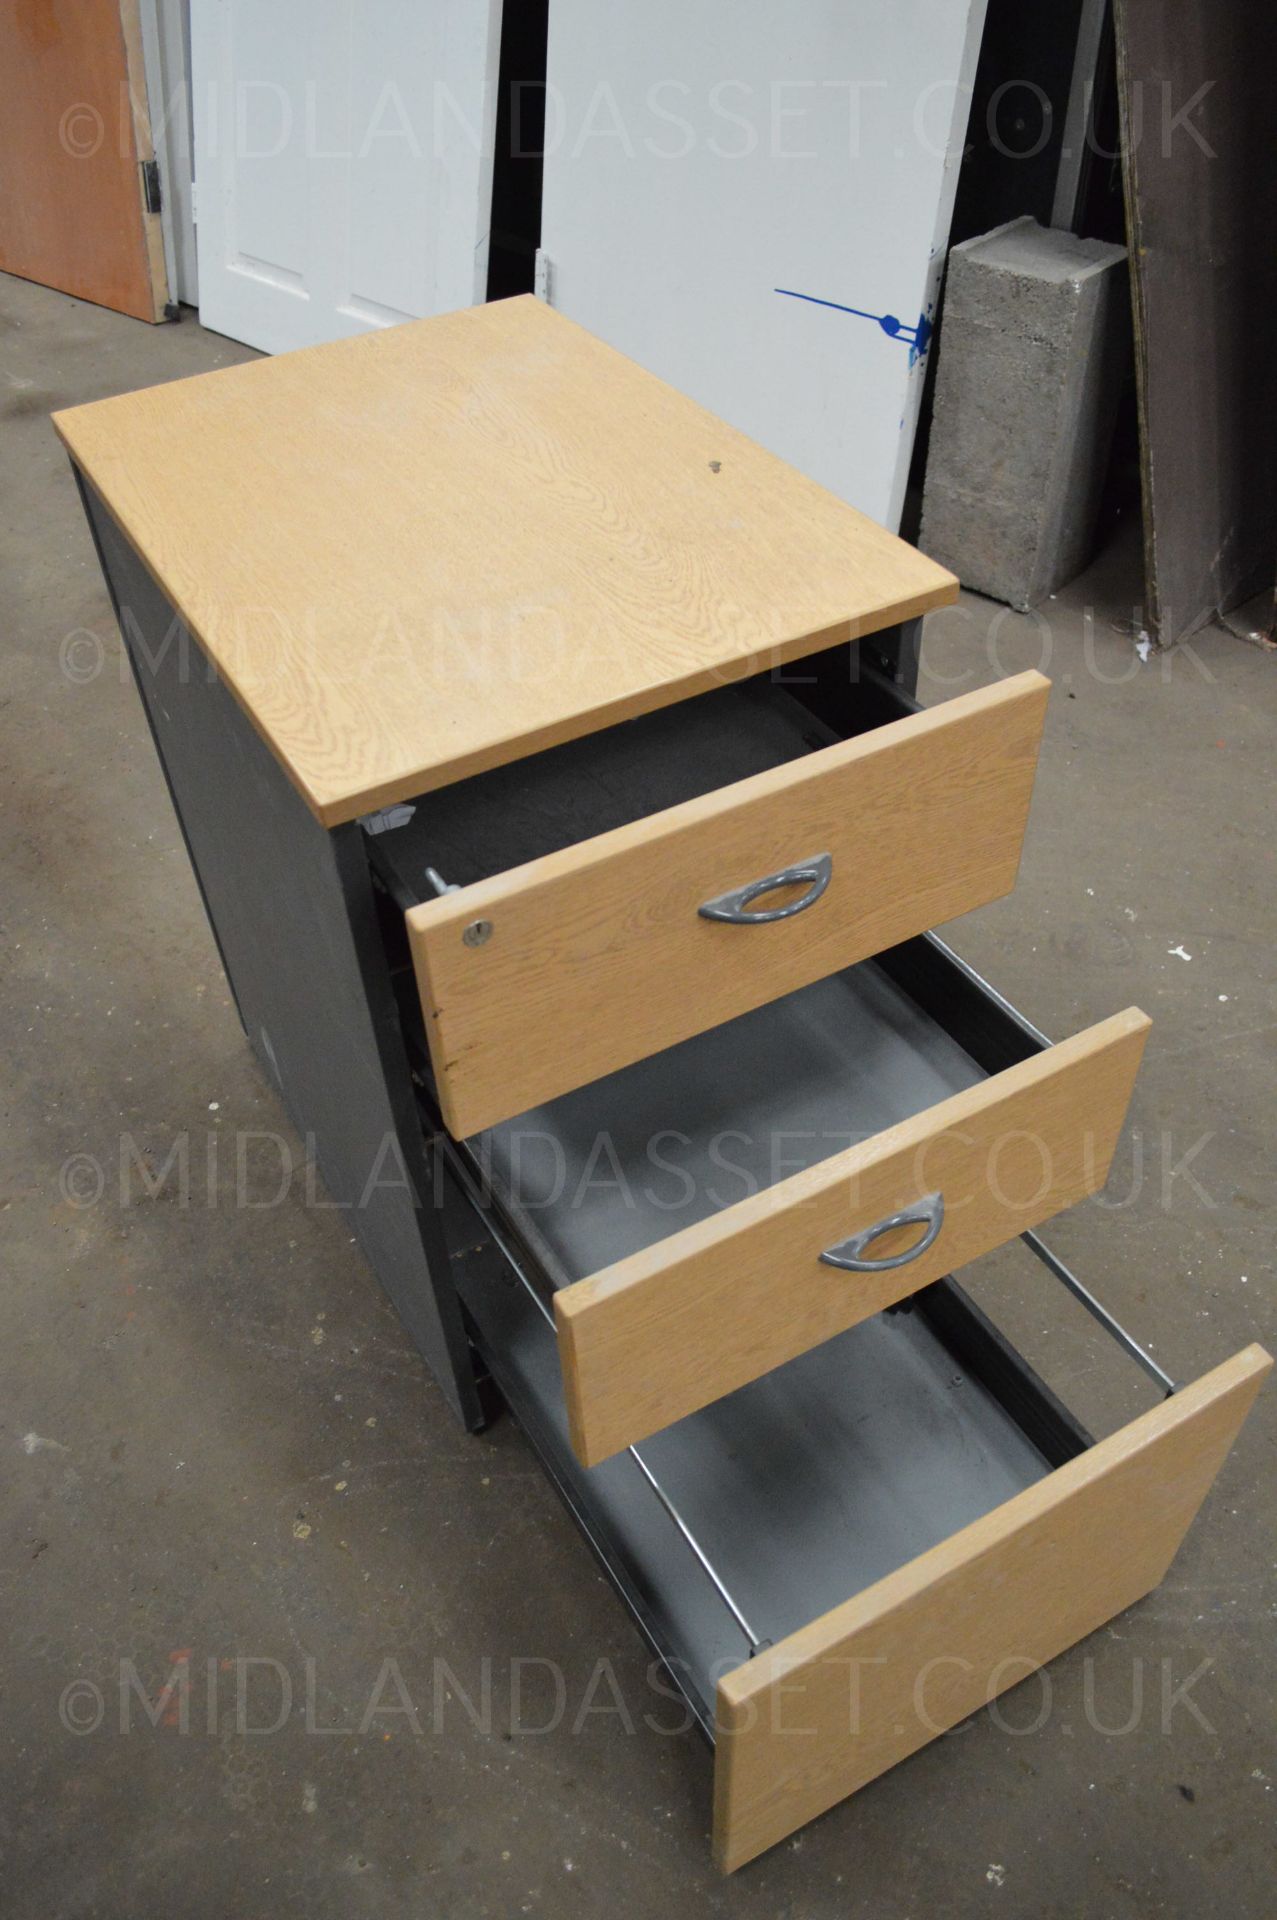 RECTANGULAR CANTILEVER DESK AND A FREE DRAW!!! - USED CONDITION (PEN MARKS ETC) OAK OFFICE DRAWERS - Image 5 of 6